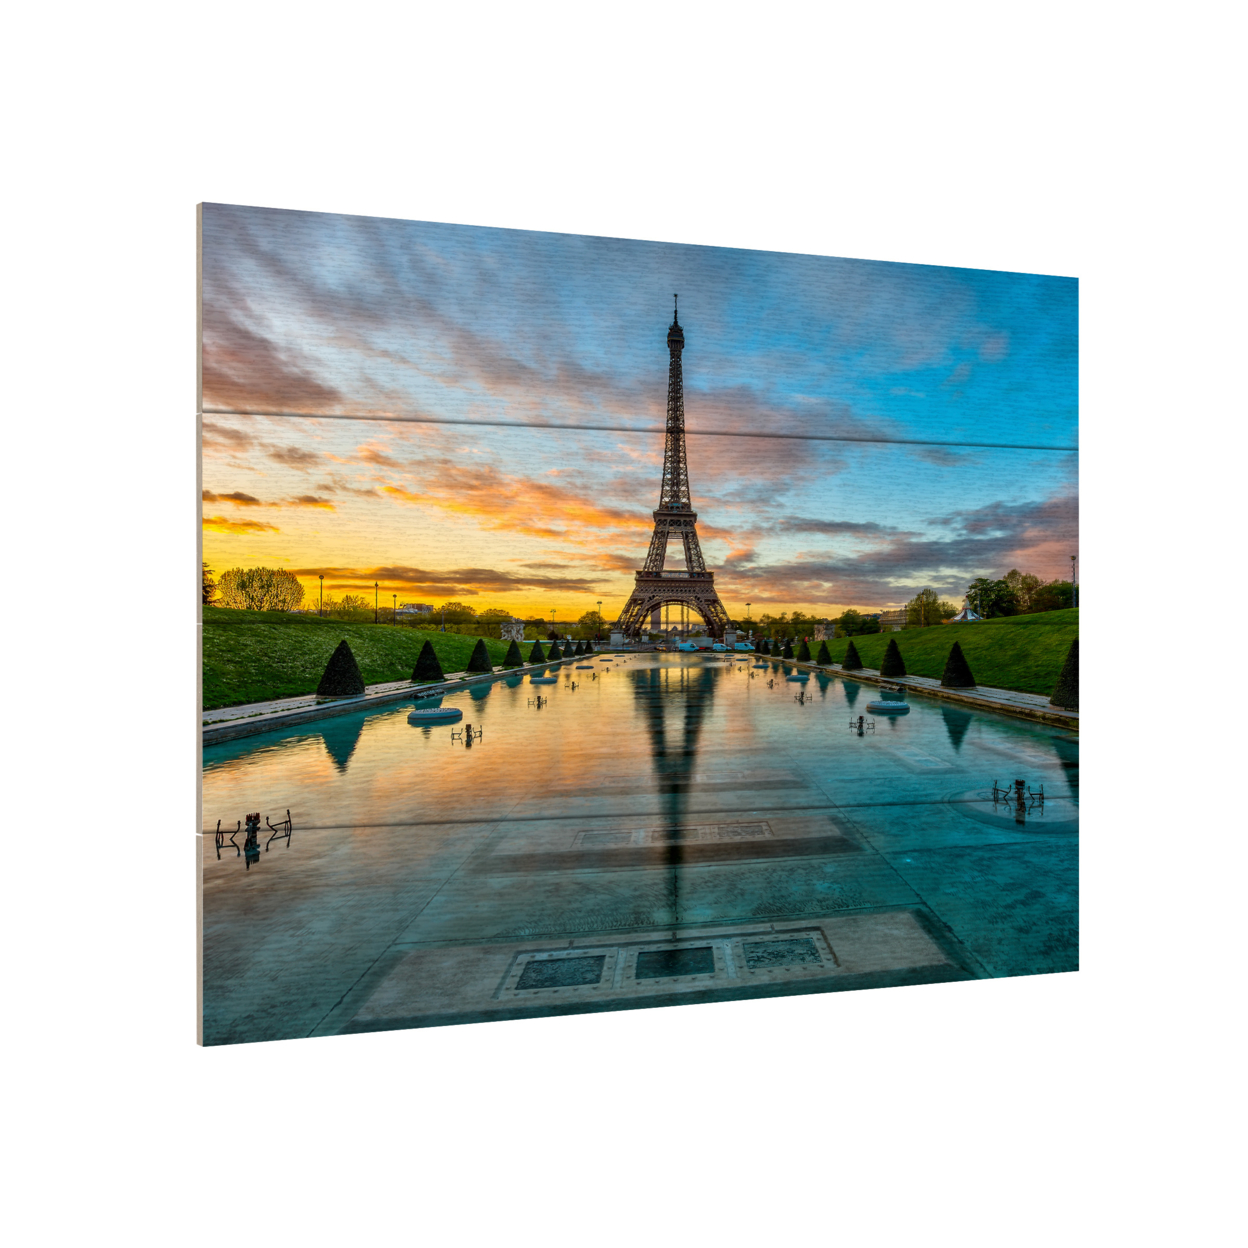 Wall Art 12 X 16 Inches Titled Sunrise In Paris Ready To Hang Printed On Wooden Planks